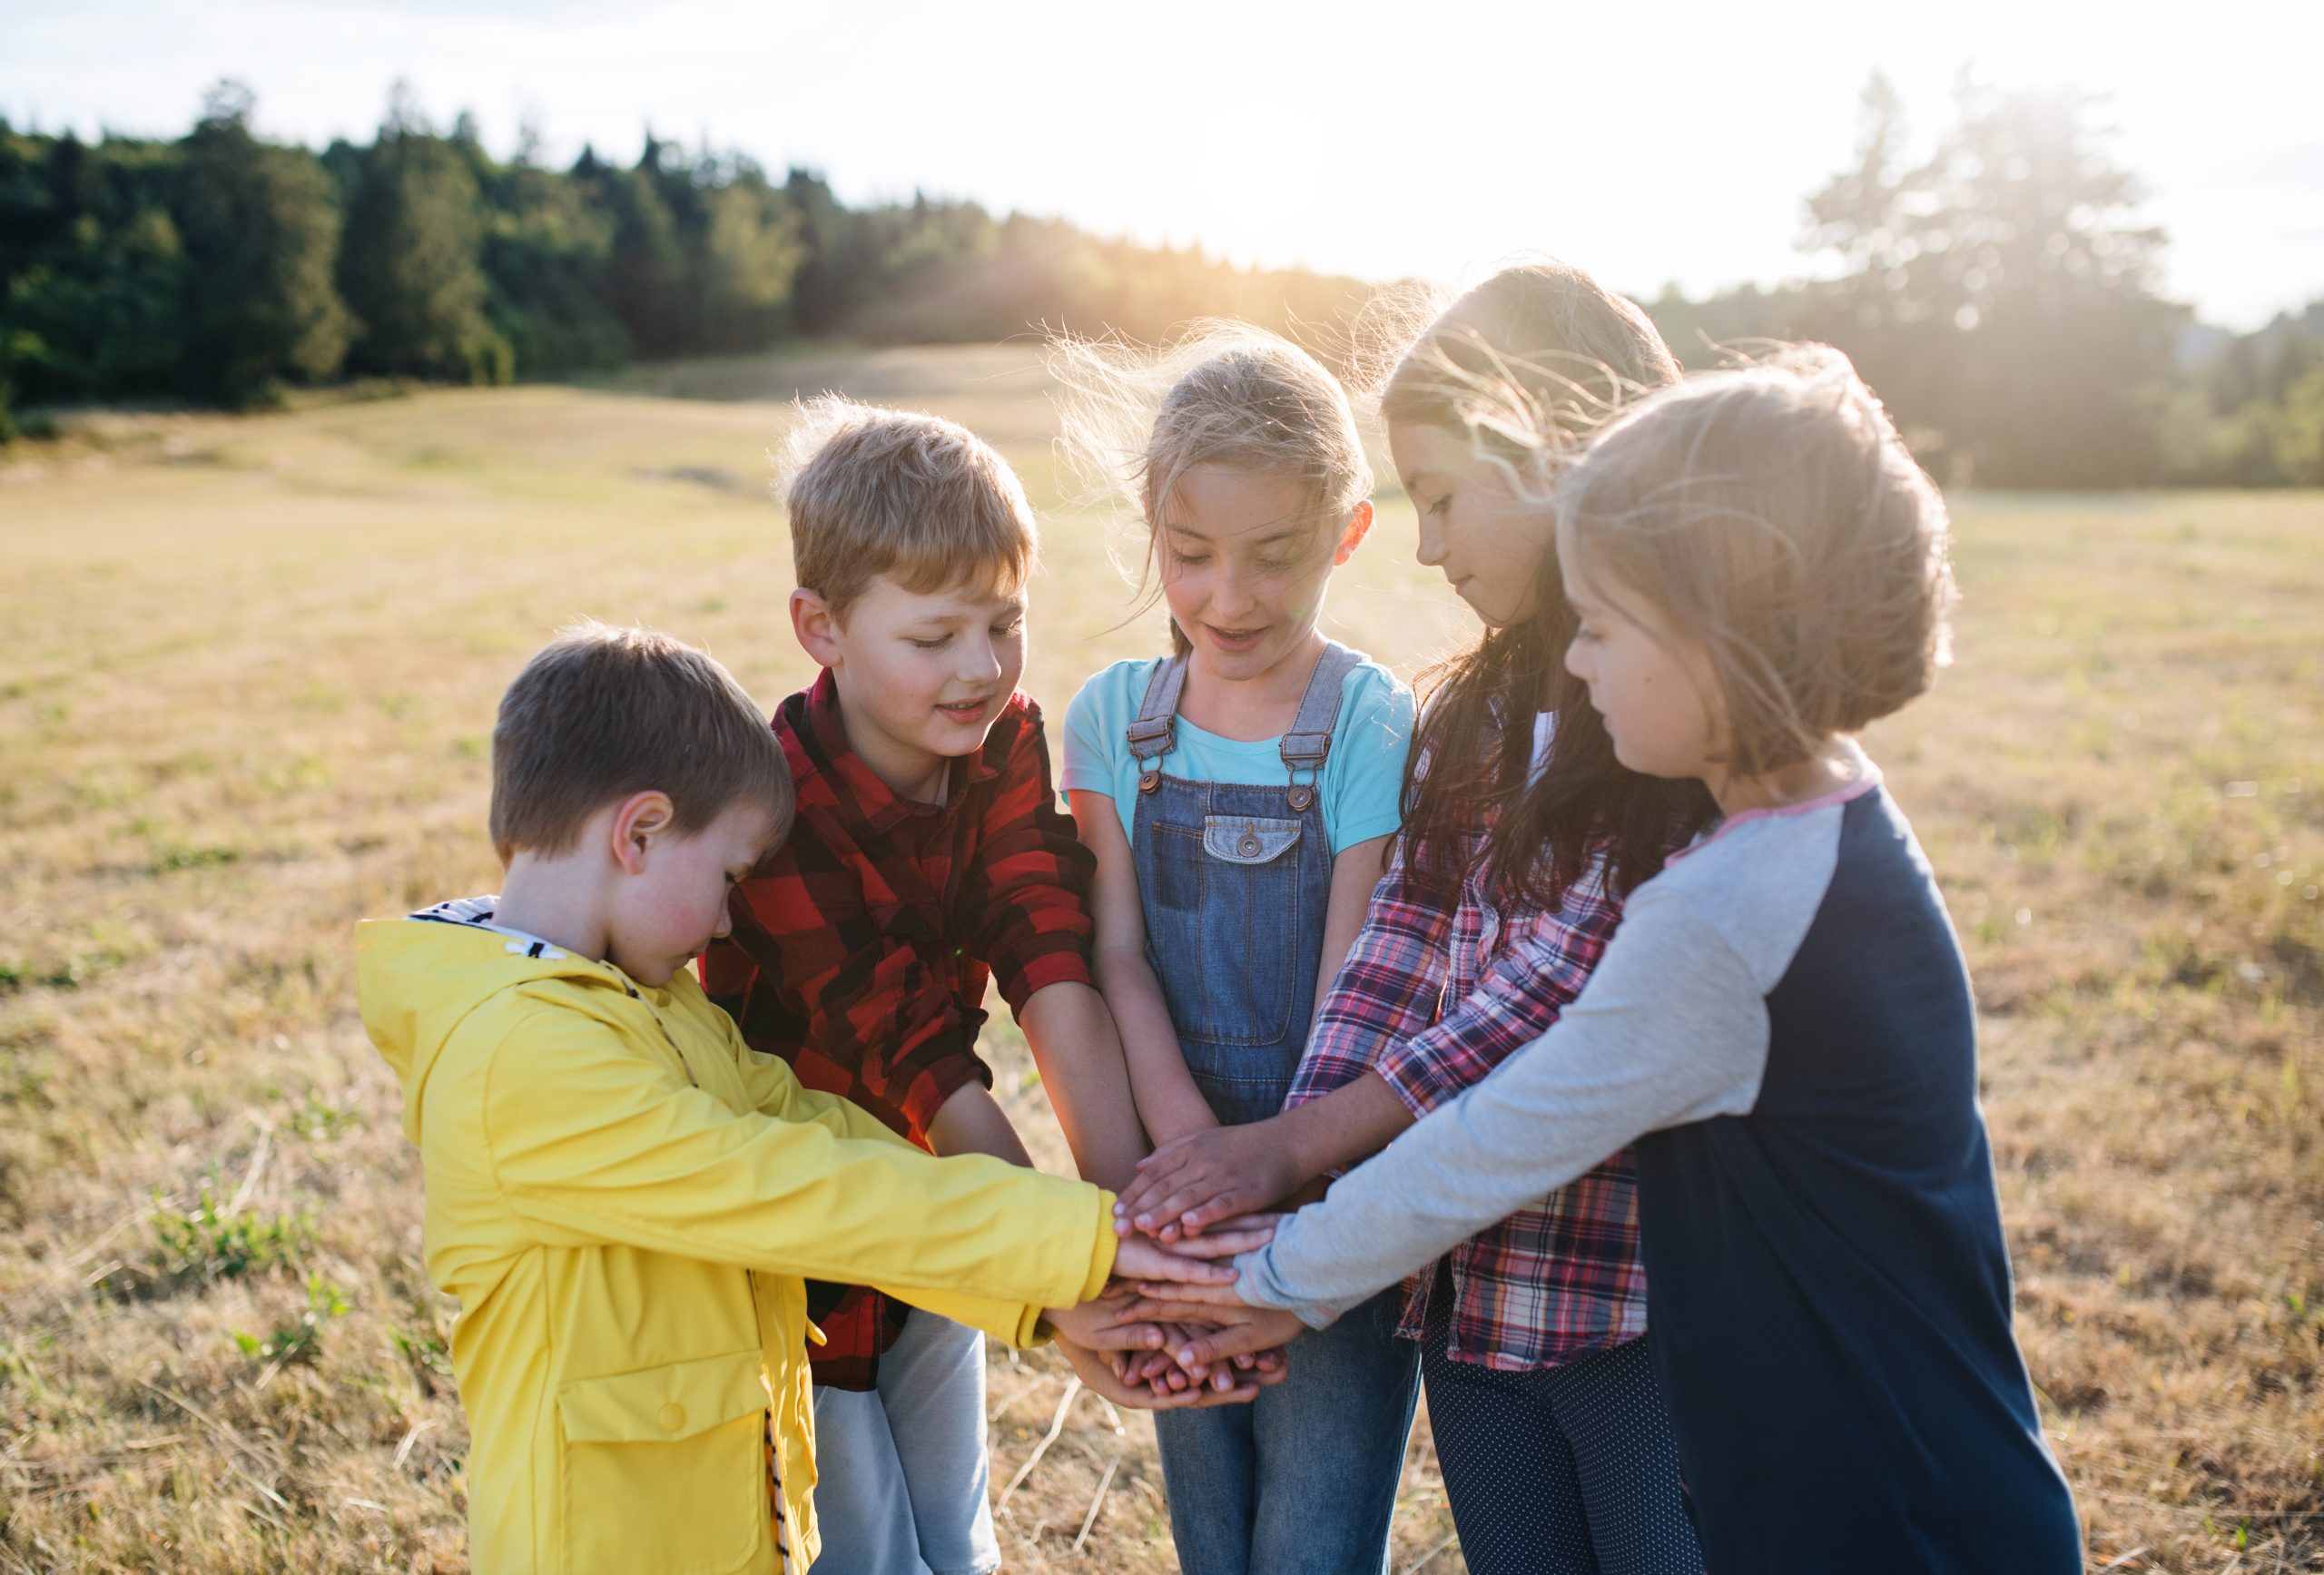 Portrait of group of school children standing on field trip in nature, putting hands together.